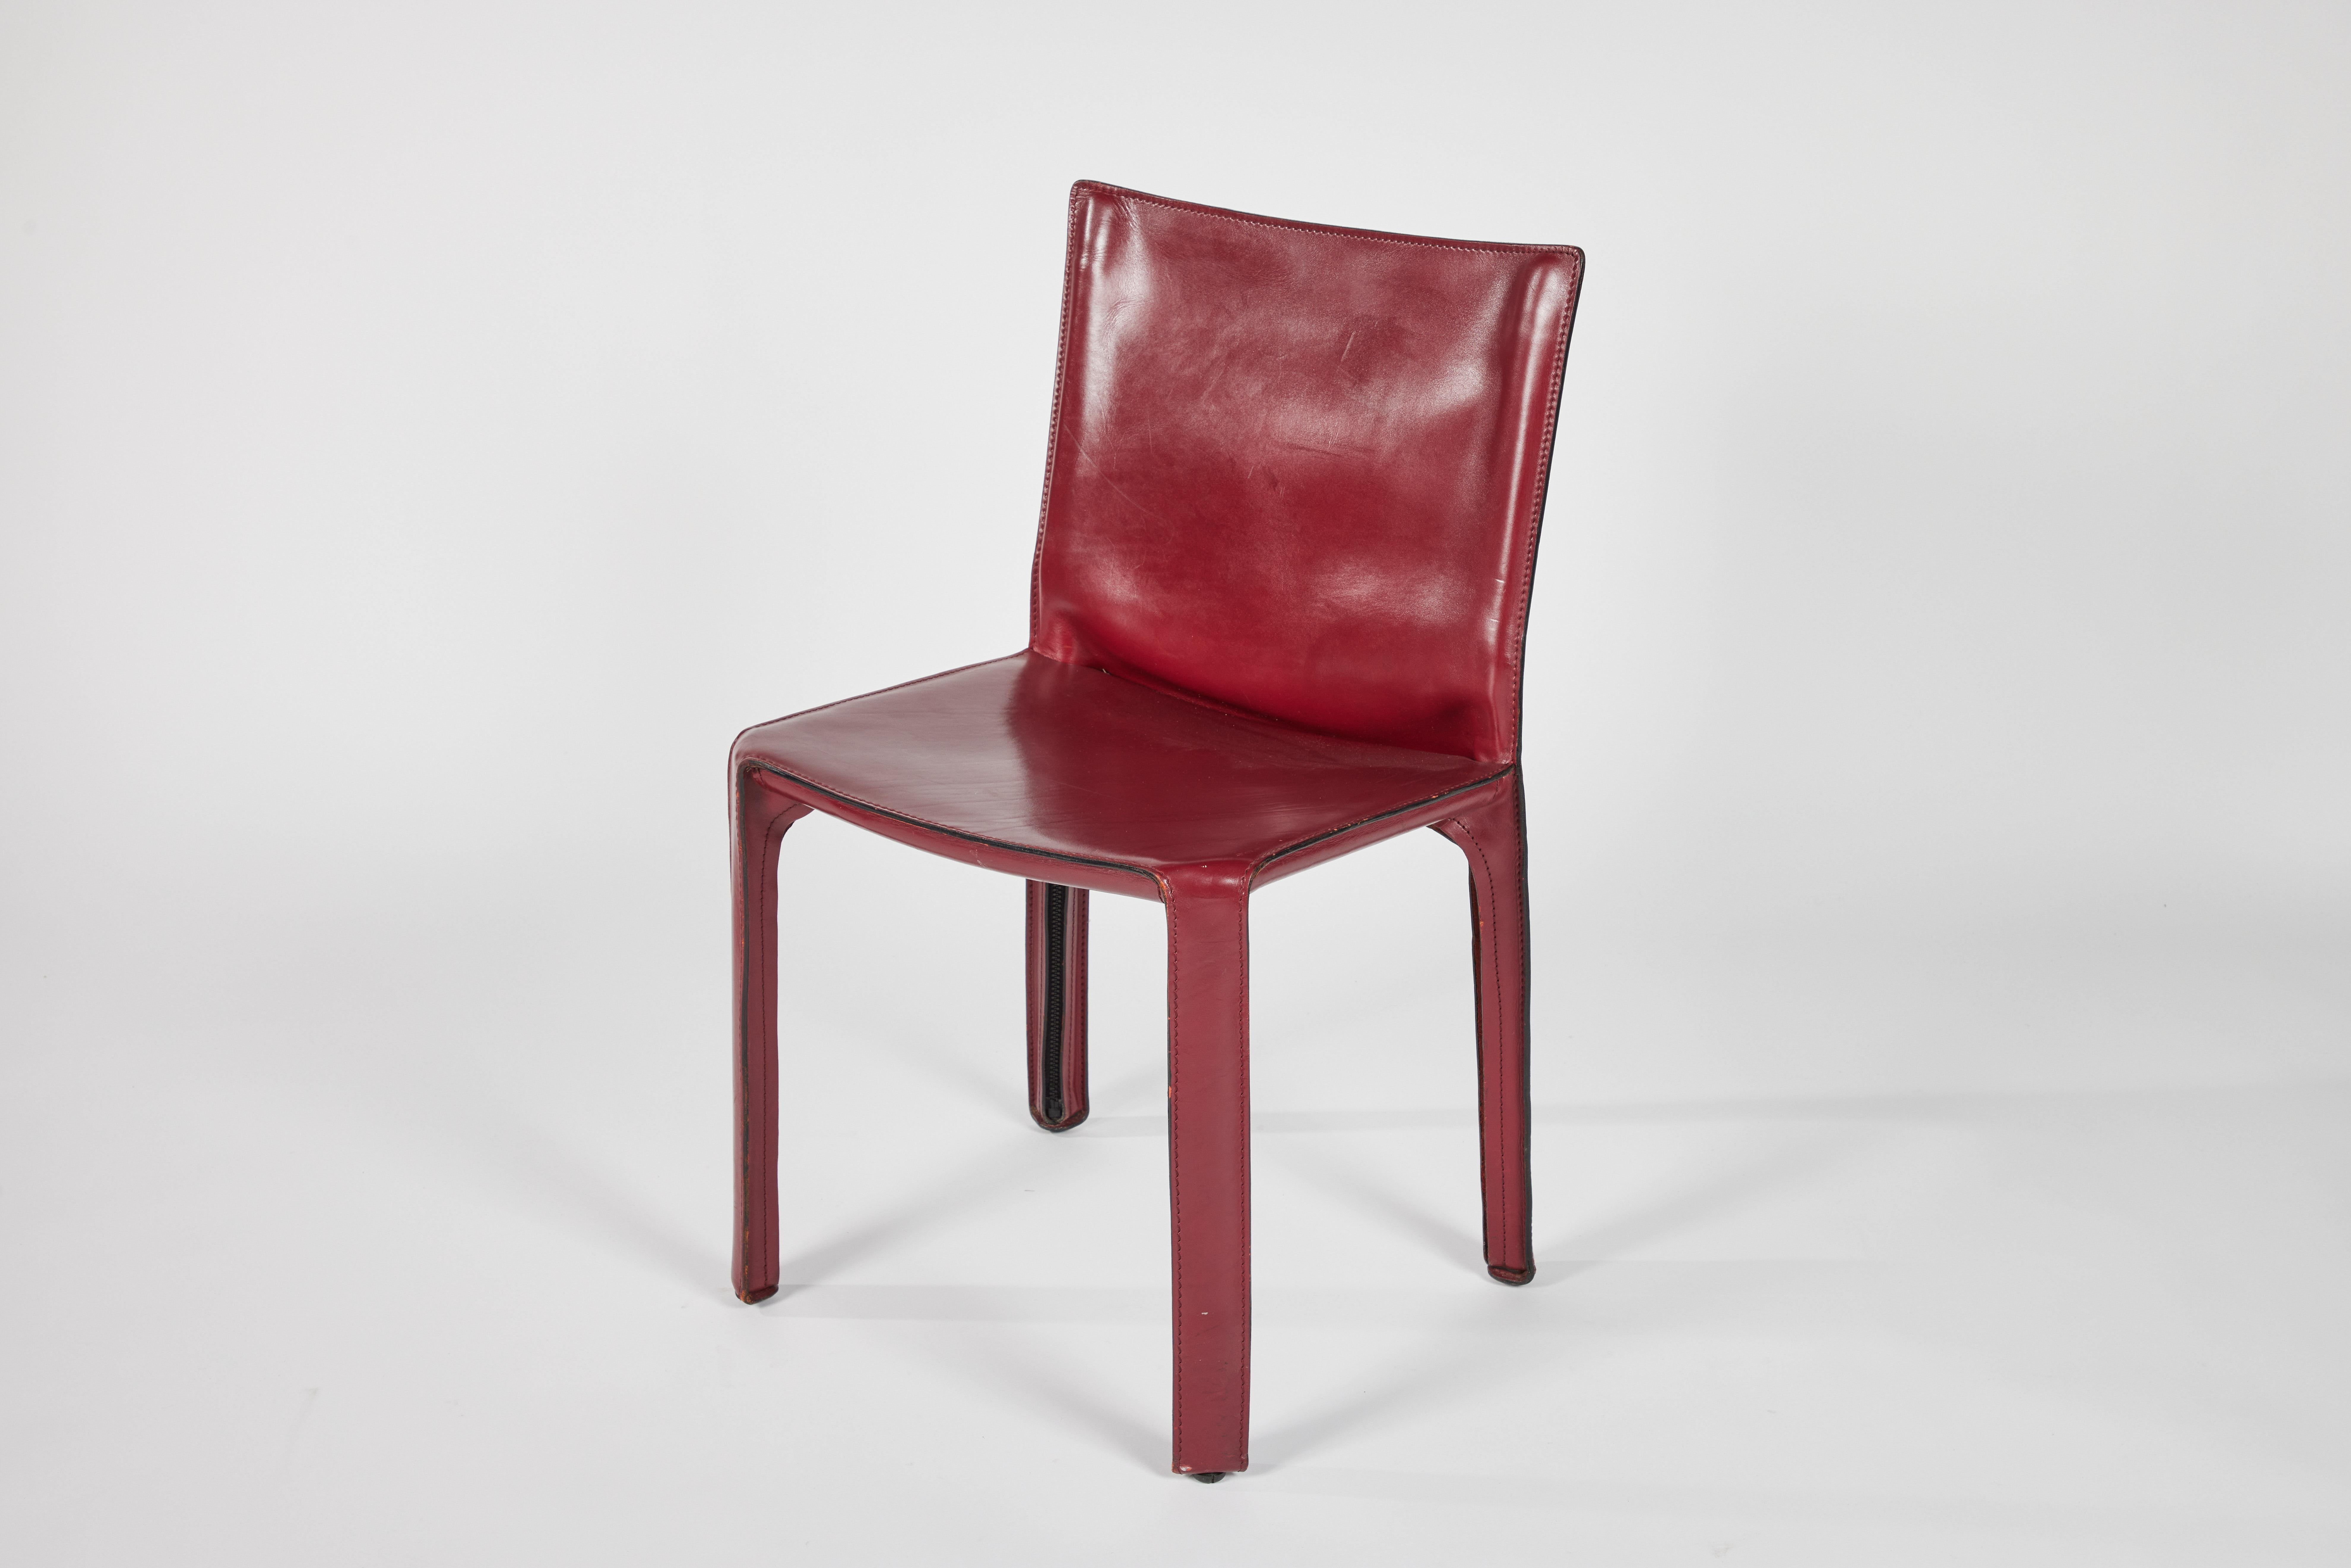 A set of 10 burgundy cab dining chairs, designed by Mario Bellini and manufactured by Cassina. 1977. 

Cab is the world’s first free-standing cowhide design chair, informed by the relationship between the skeleton and the skin; an authentic